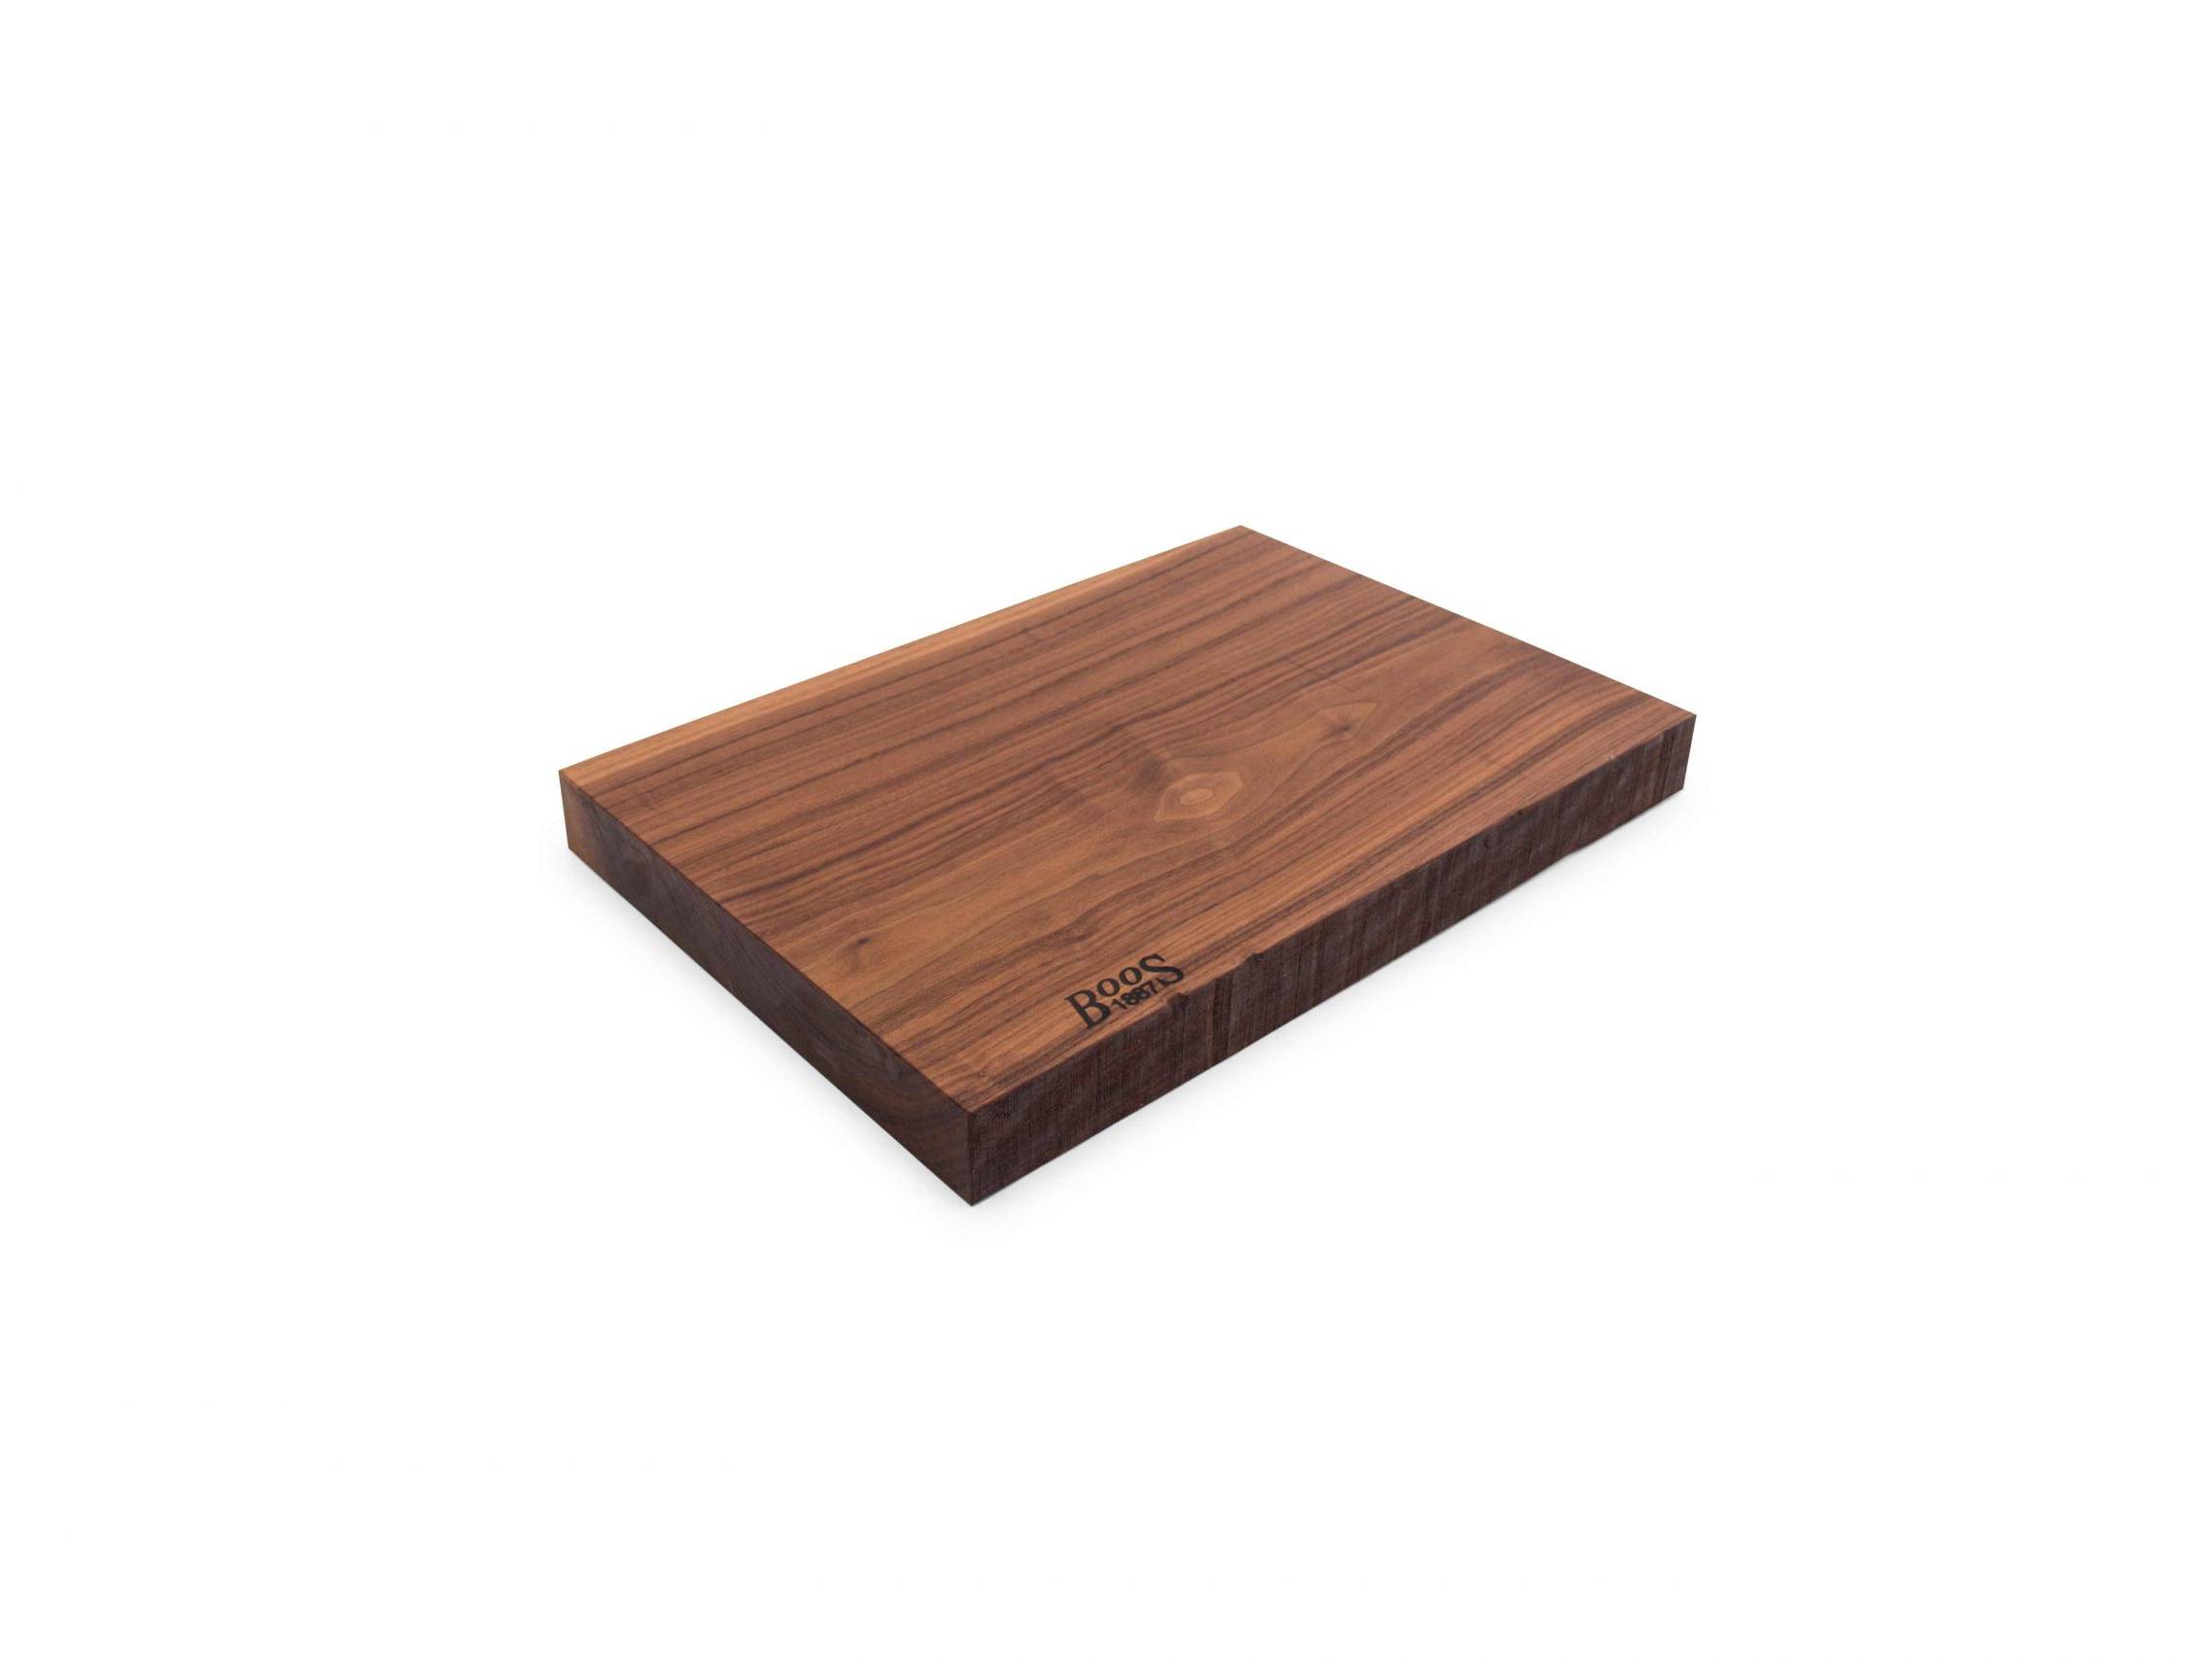 Boos 1887 / Rustic Edge one piece cutting board; Black Walnut; can be used on both sides 69